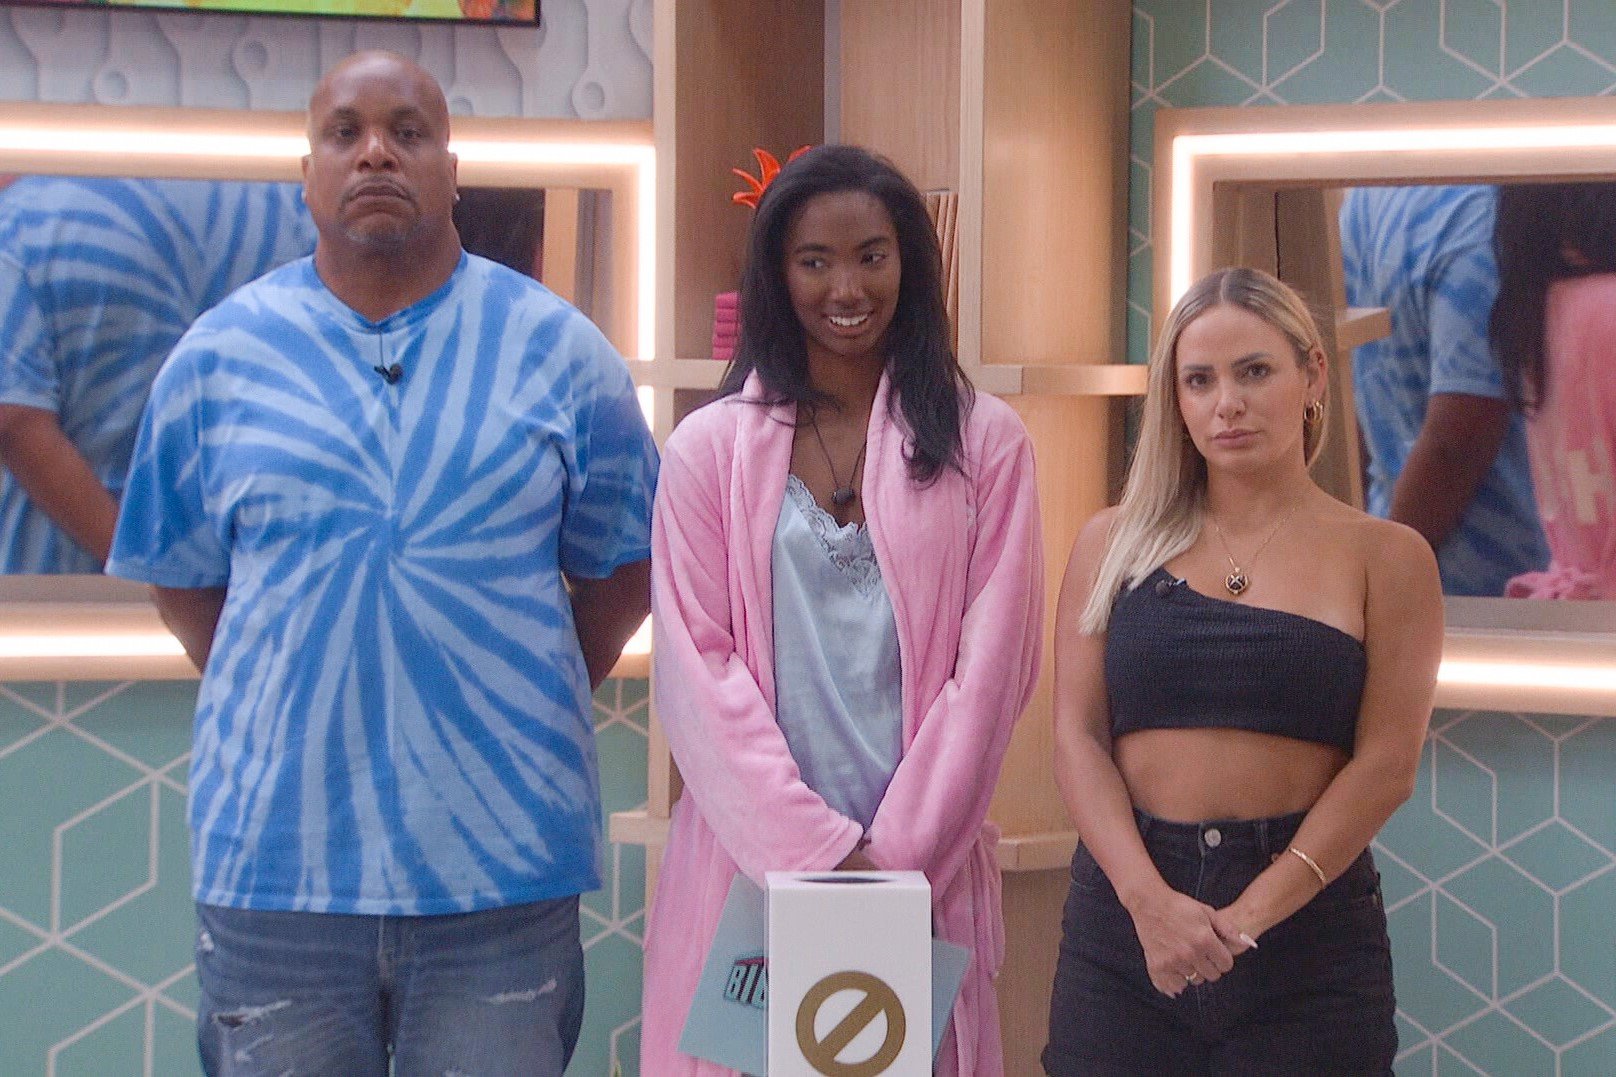 Terrance Higgins, Taylor Hale, and Indy Santos compete in 'Big Brother 24' on CBS, and according to spoilers, either Terrance or Indy will leave the house on Aug. 18. Terrance wears a blue tie dye shirt and jeans. Taylor wears a pink robe over a light blue nightgown. Indy wears a black crop top and black shorts.